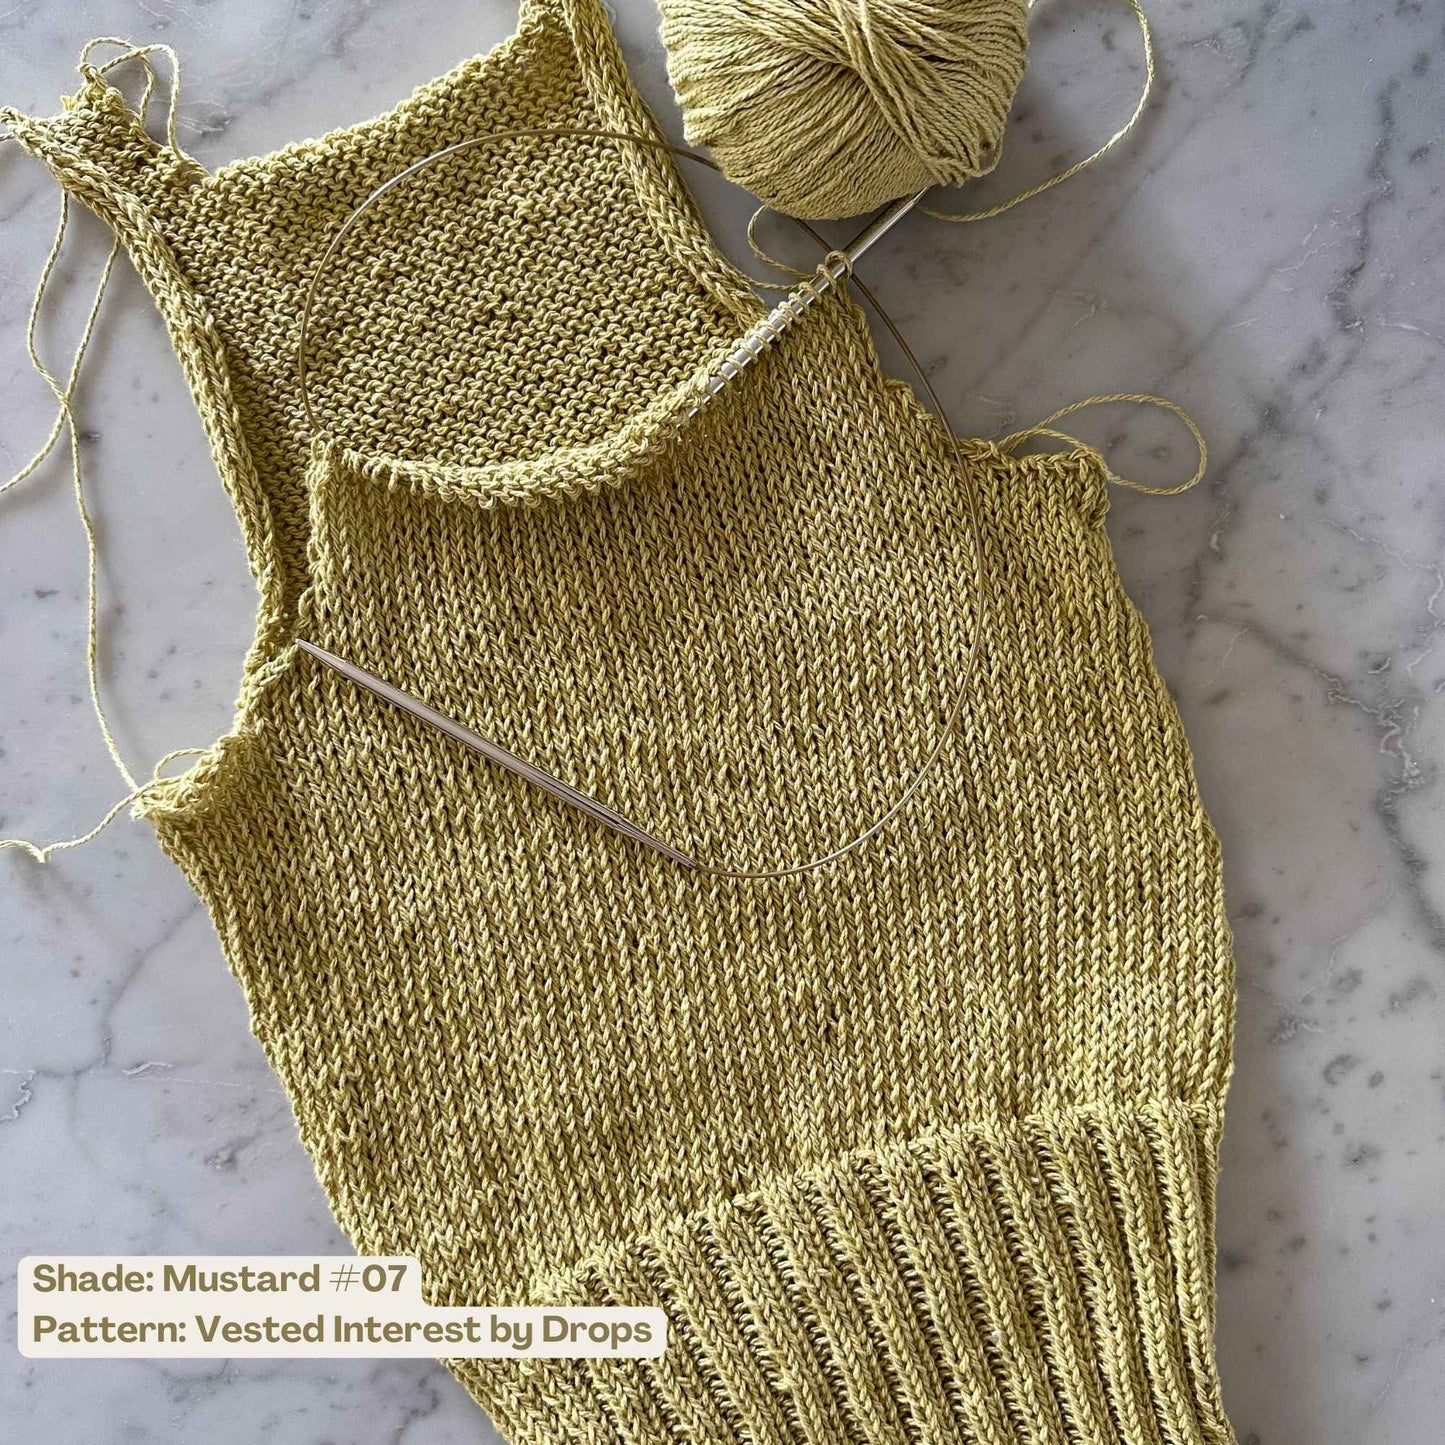 
                  
                    wip knitted vest using pascuali re-jeans-recycled denim yarn in mustard #07. A lovely yellow-green yarn in 100% recycled cotton
                  
                